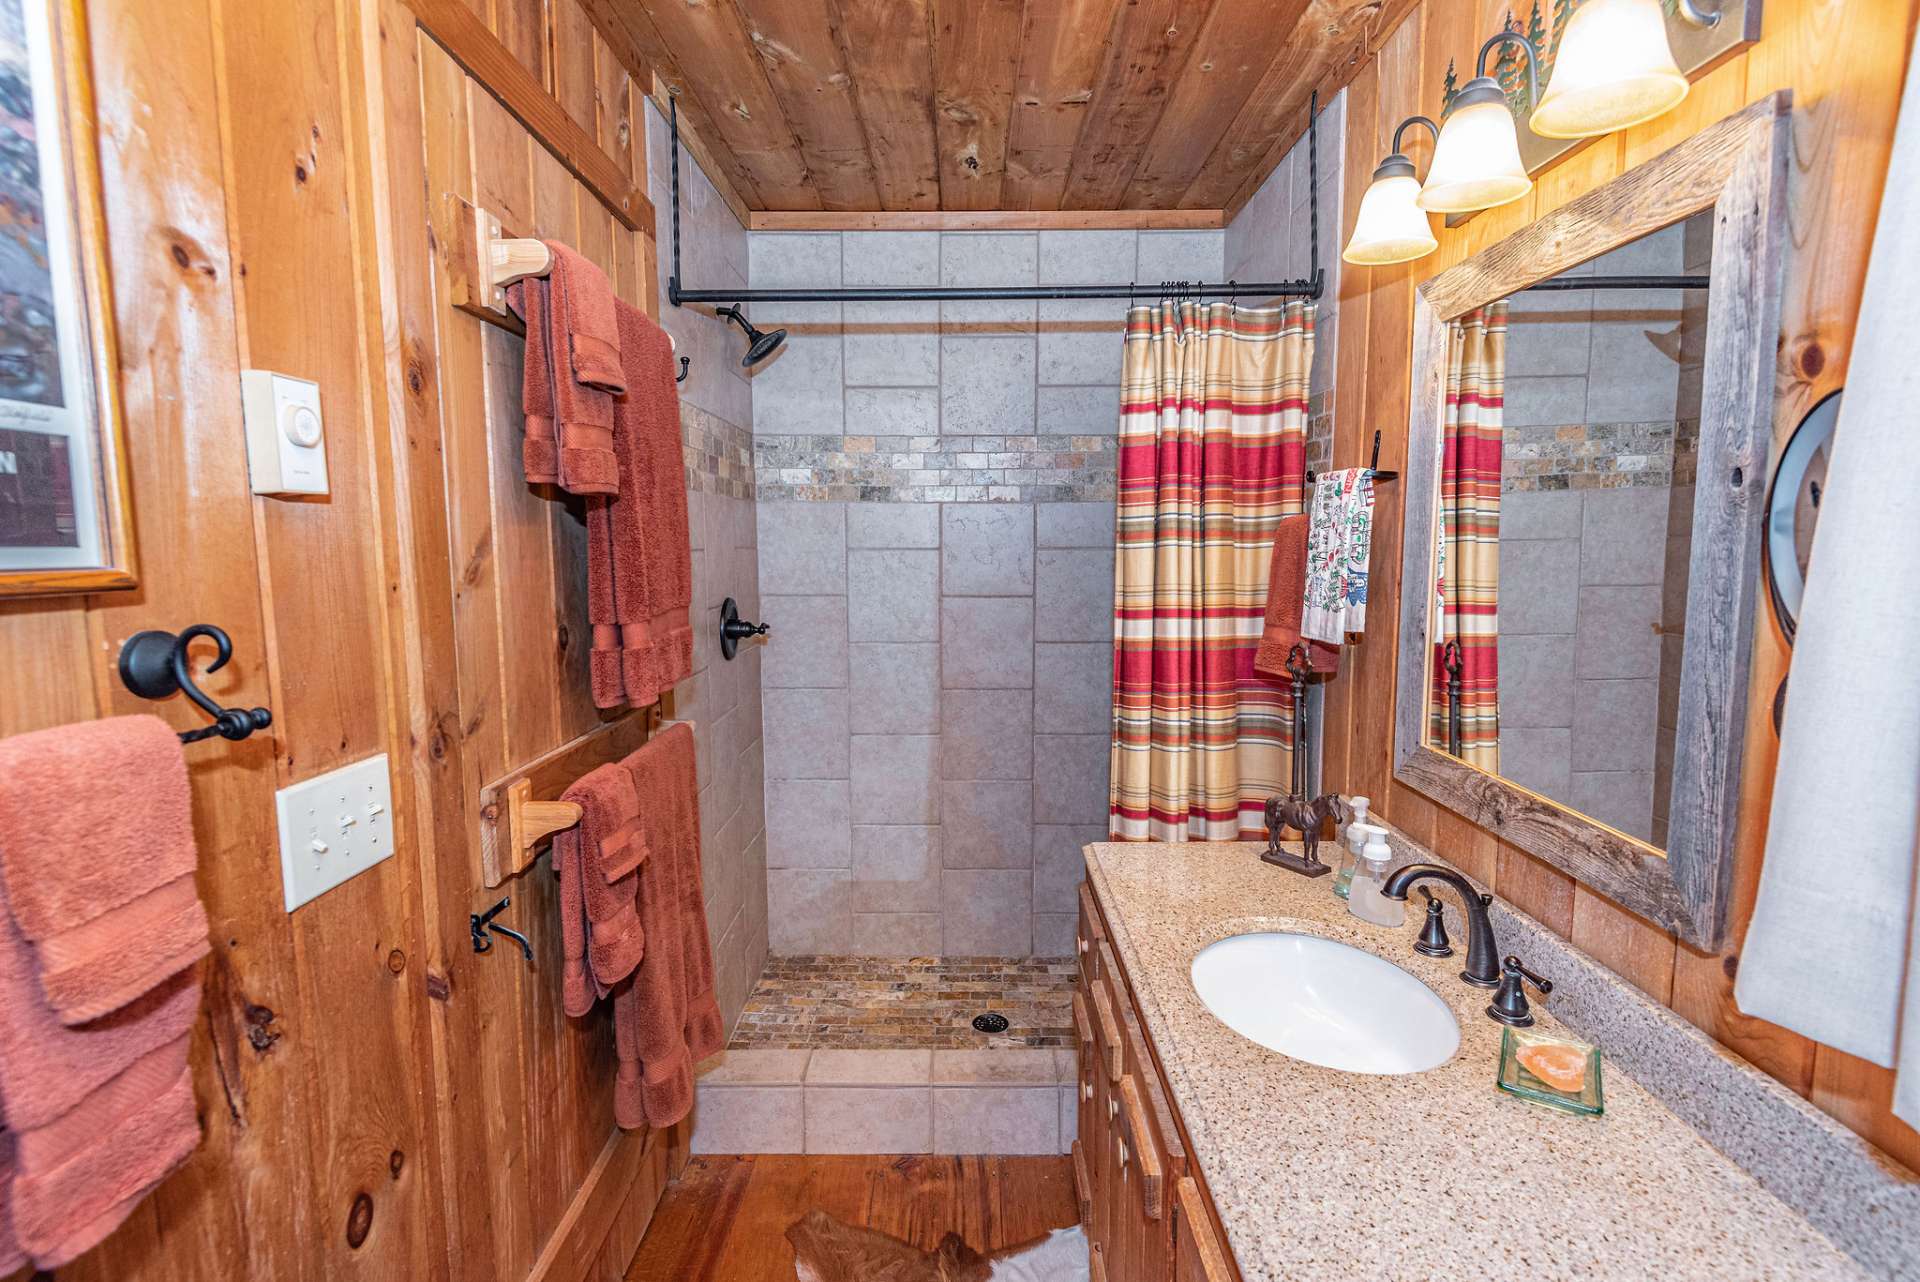 Main bath has easy access tiled walk-in shower. A full size washer and dryer is conveniently situated in bathroom.